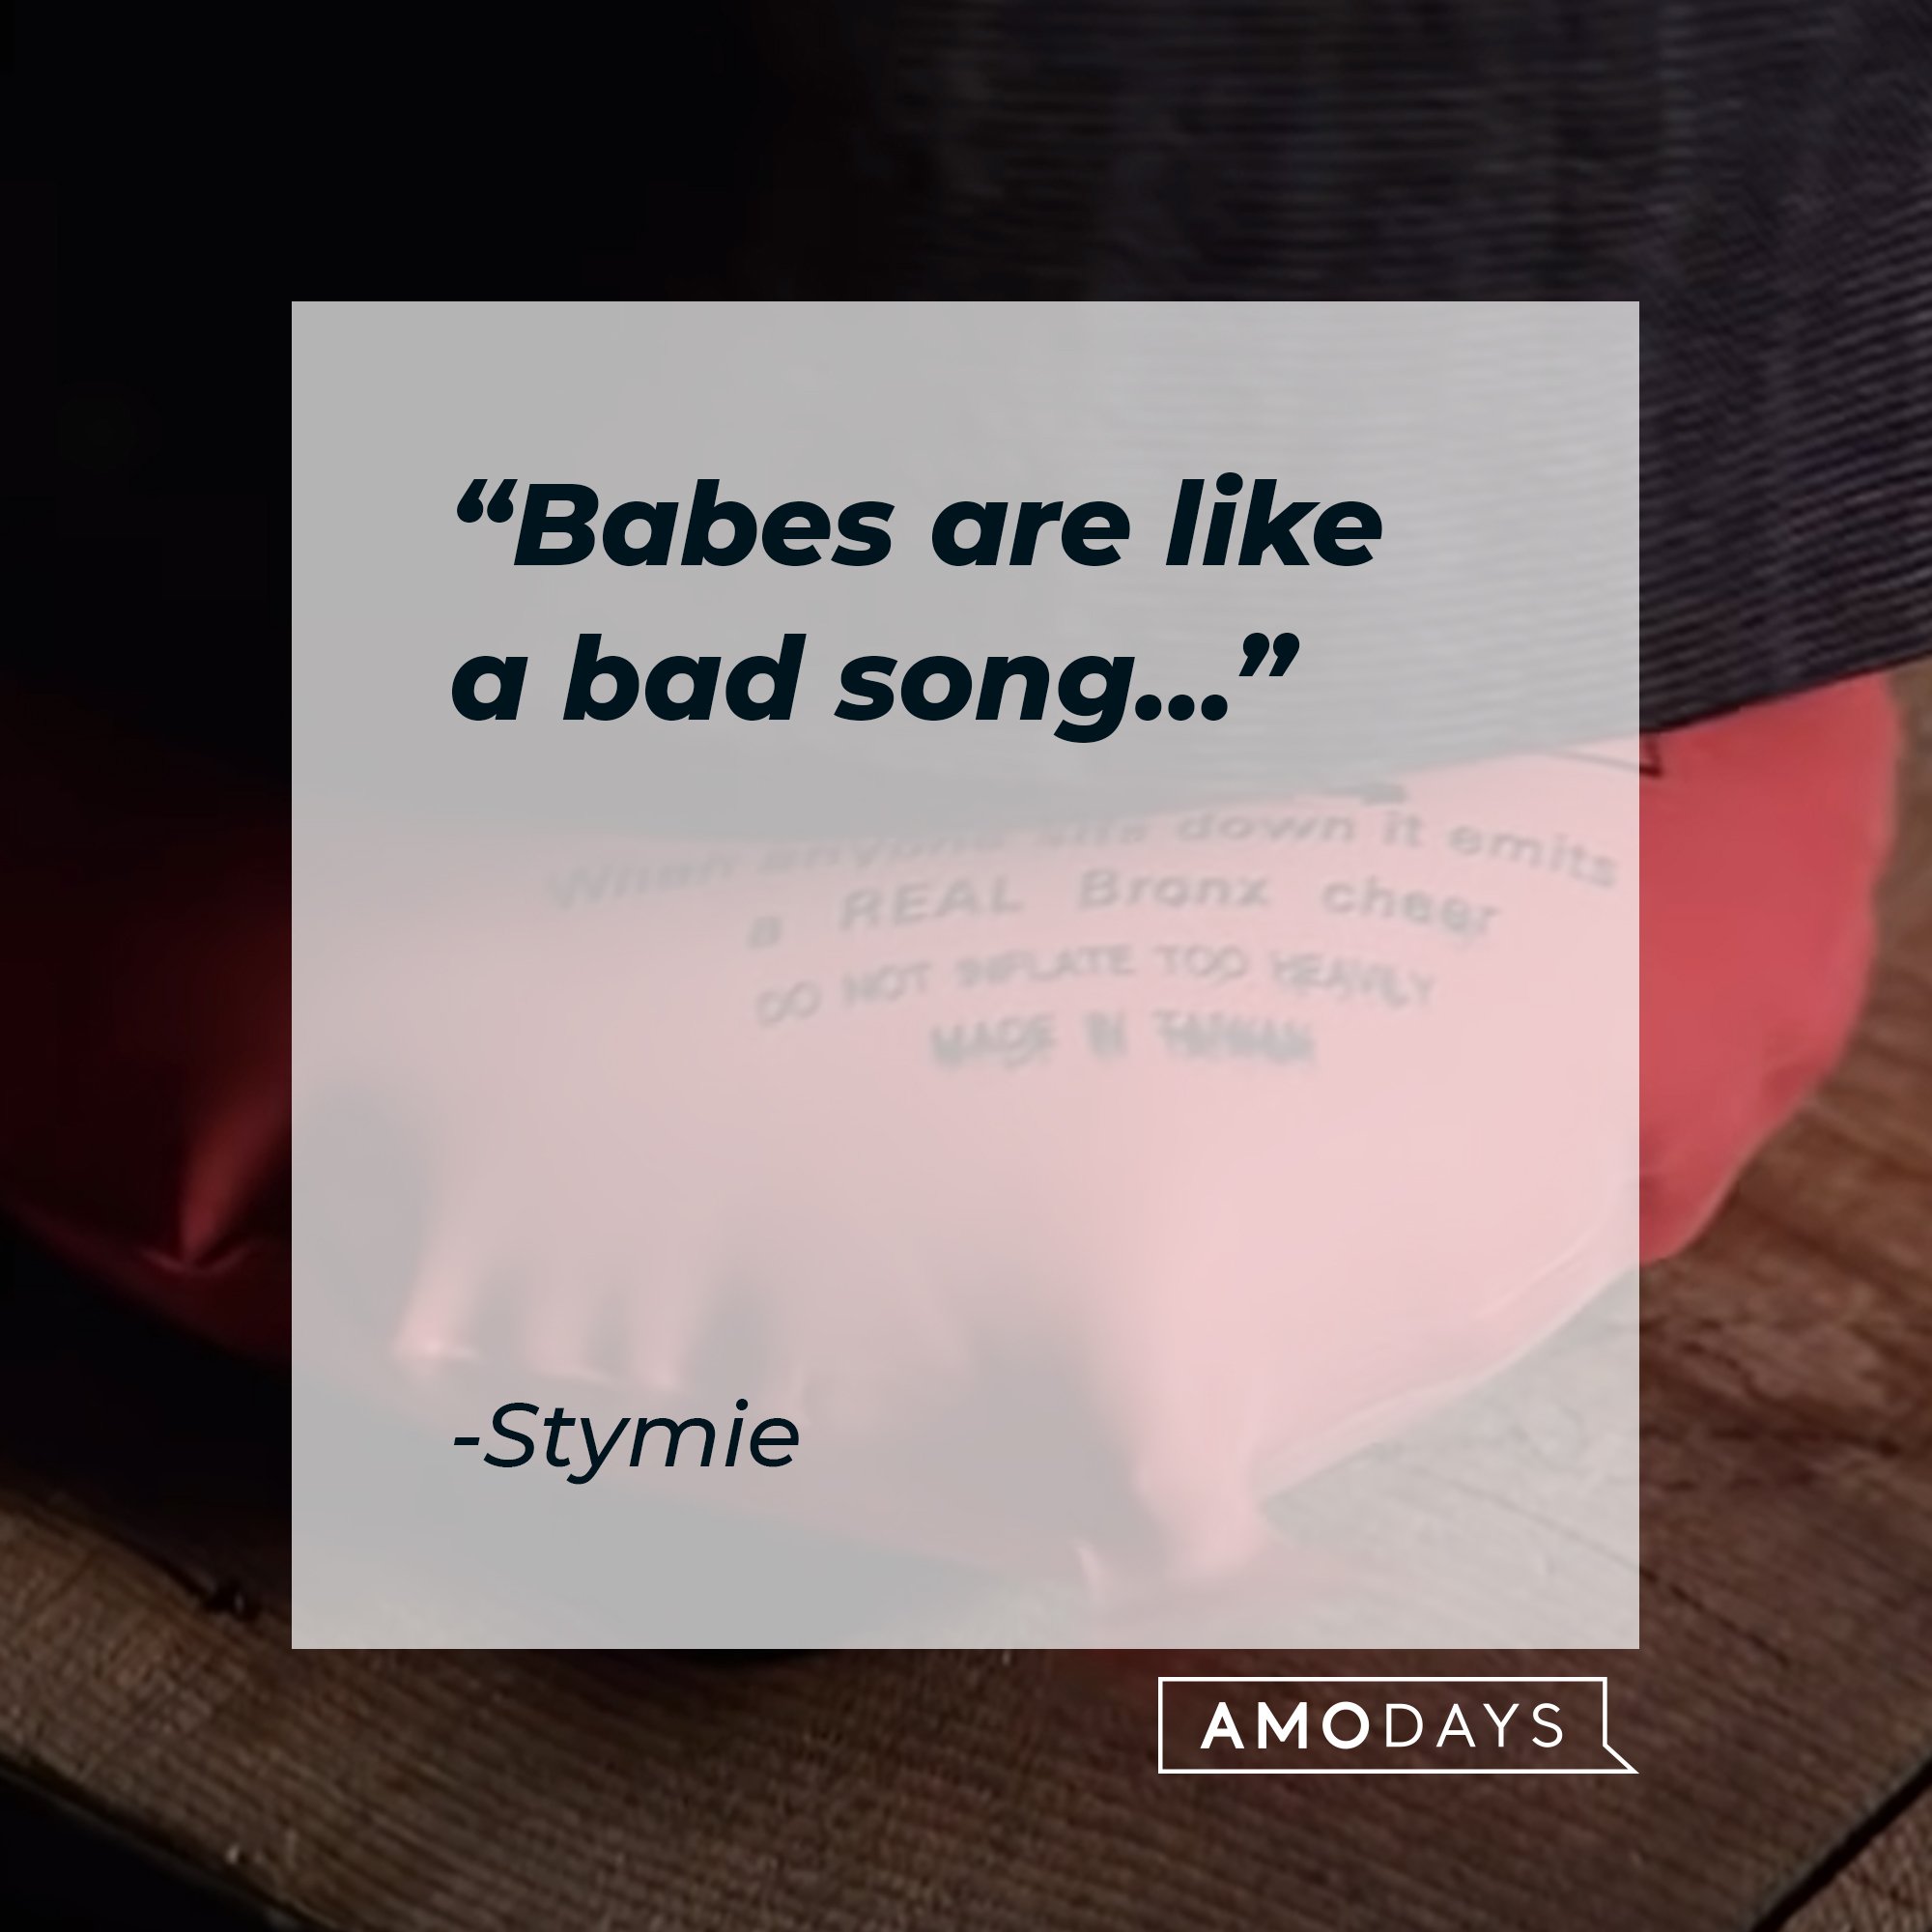 Stymie’s quote: "Babes are like a bad song…" | Image: AmoDays